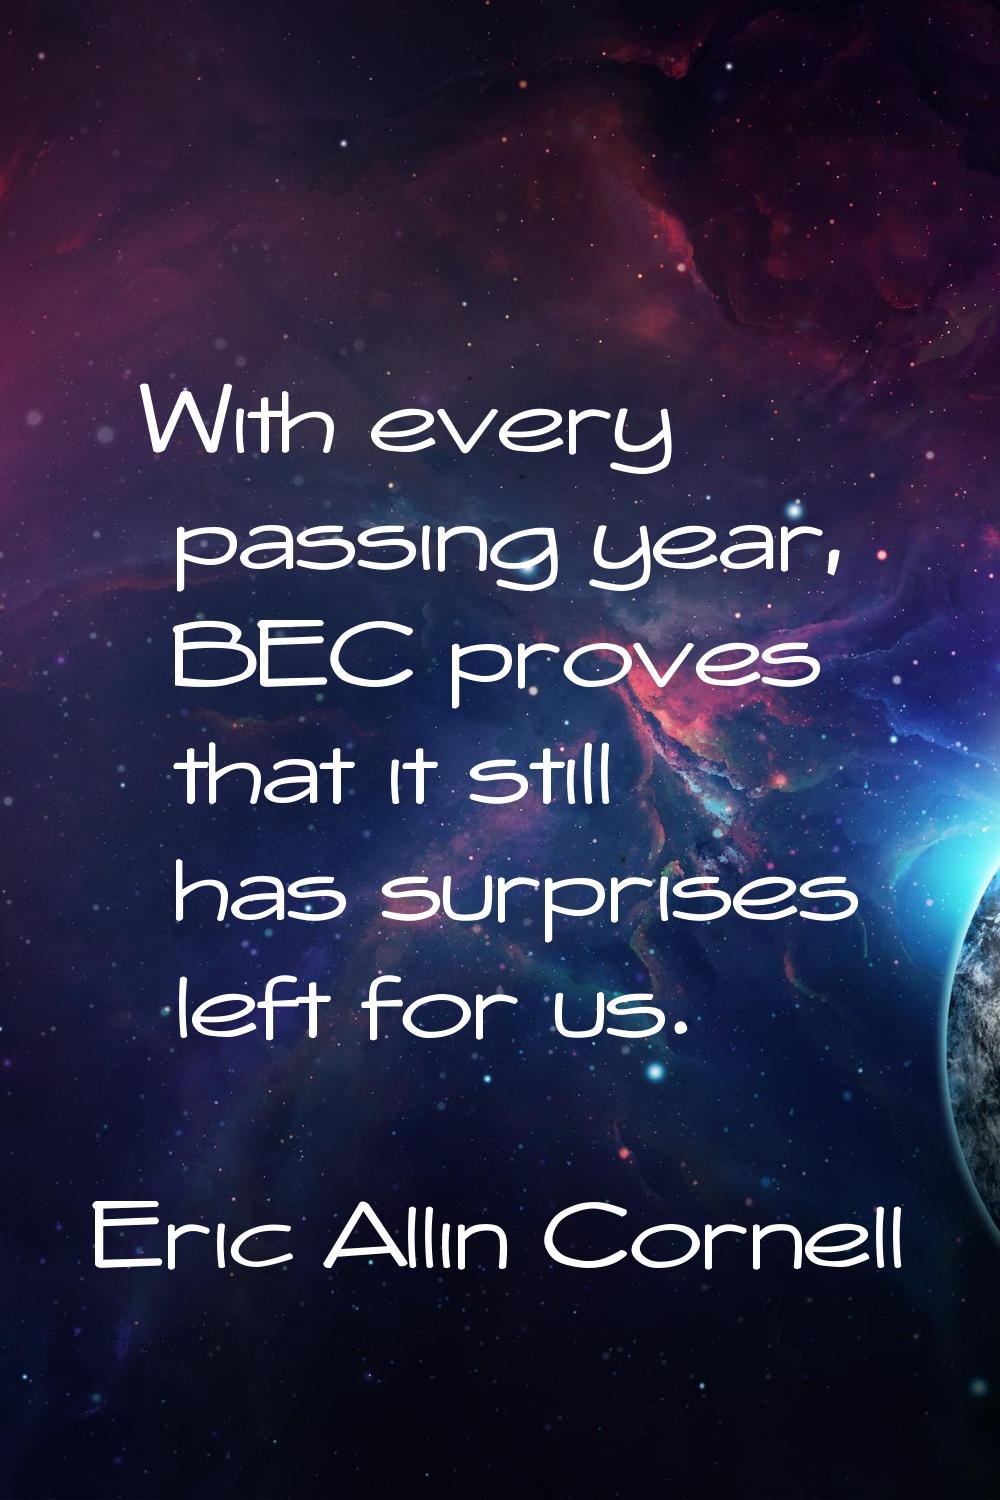 With every passing year, BEC proves that it still has surprises left for us.